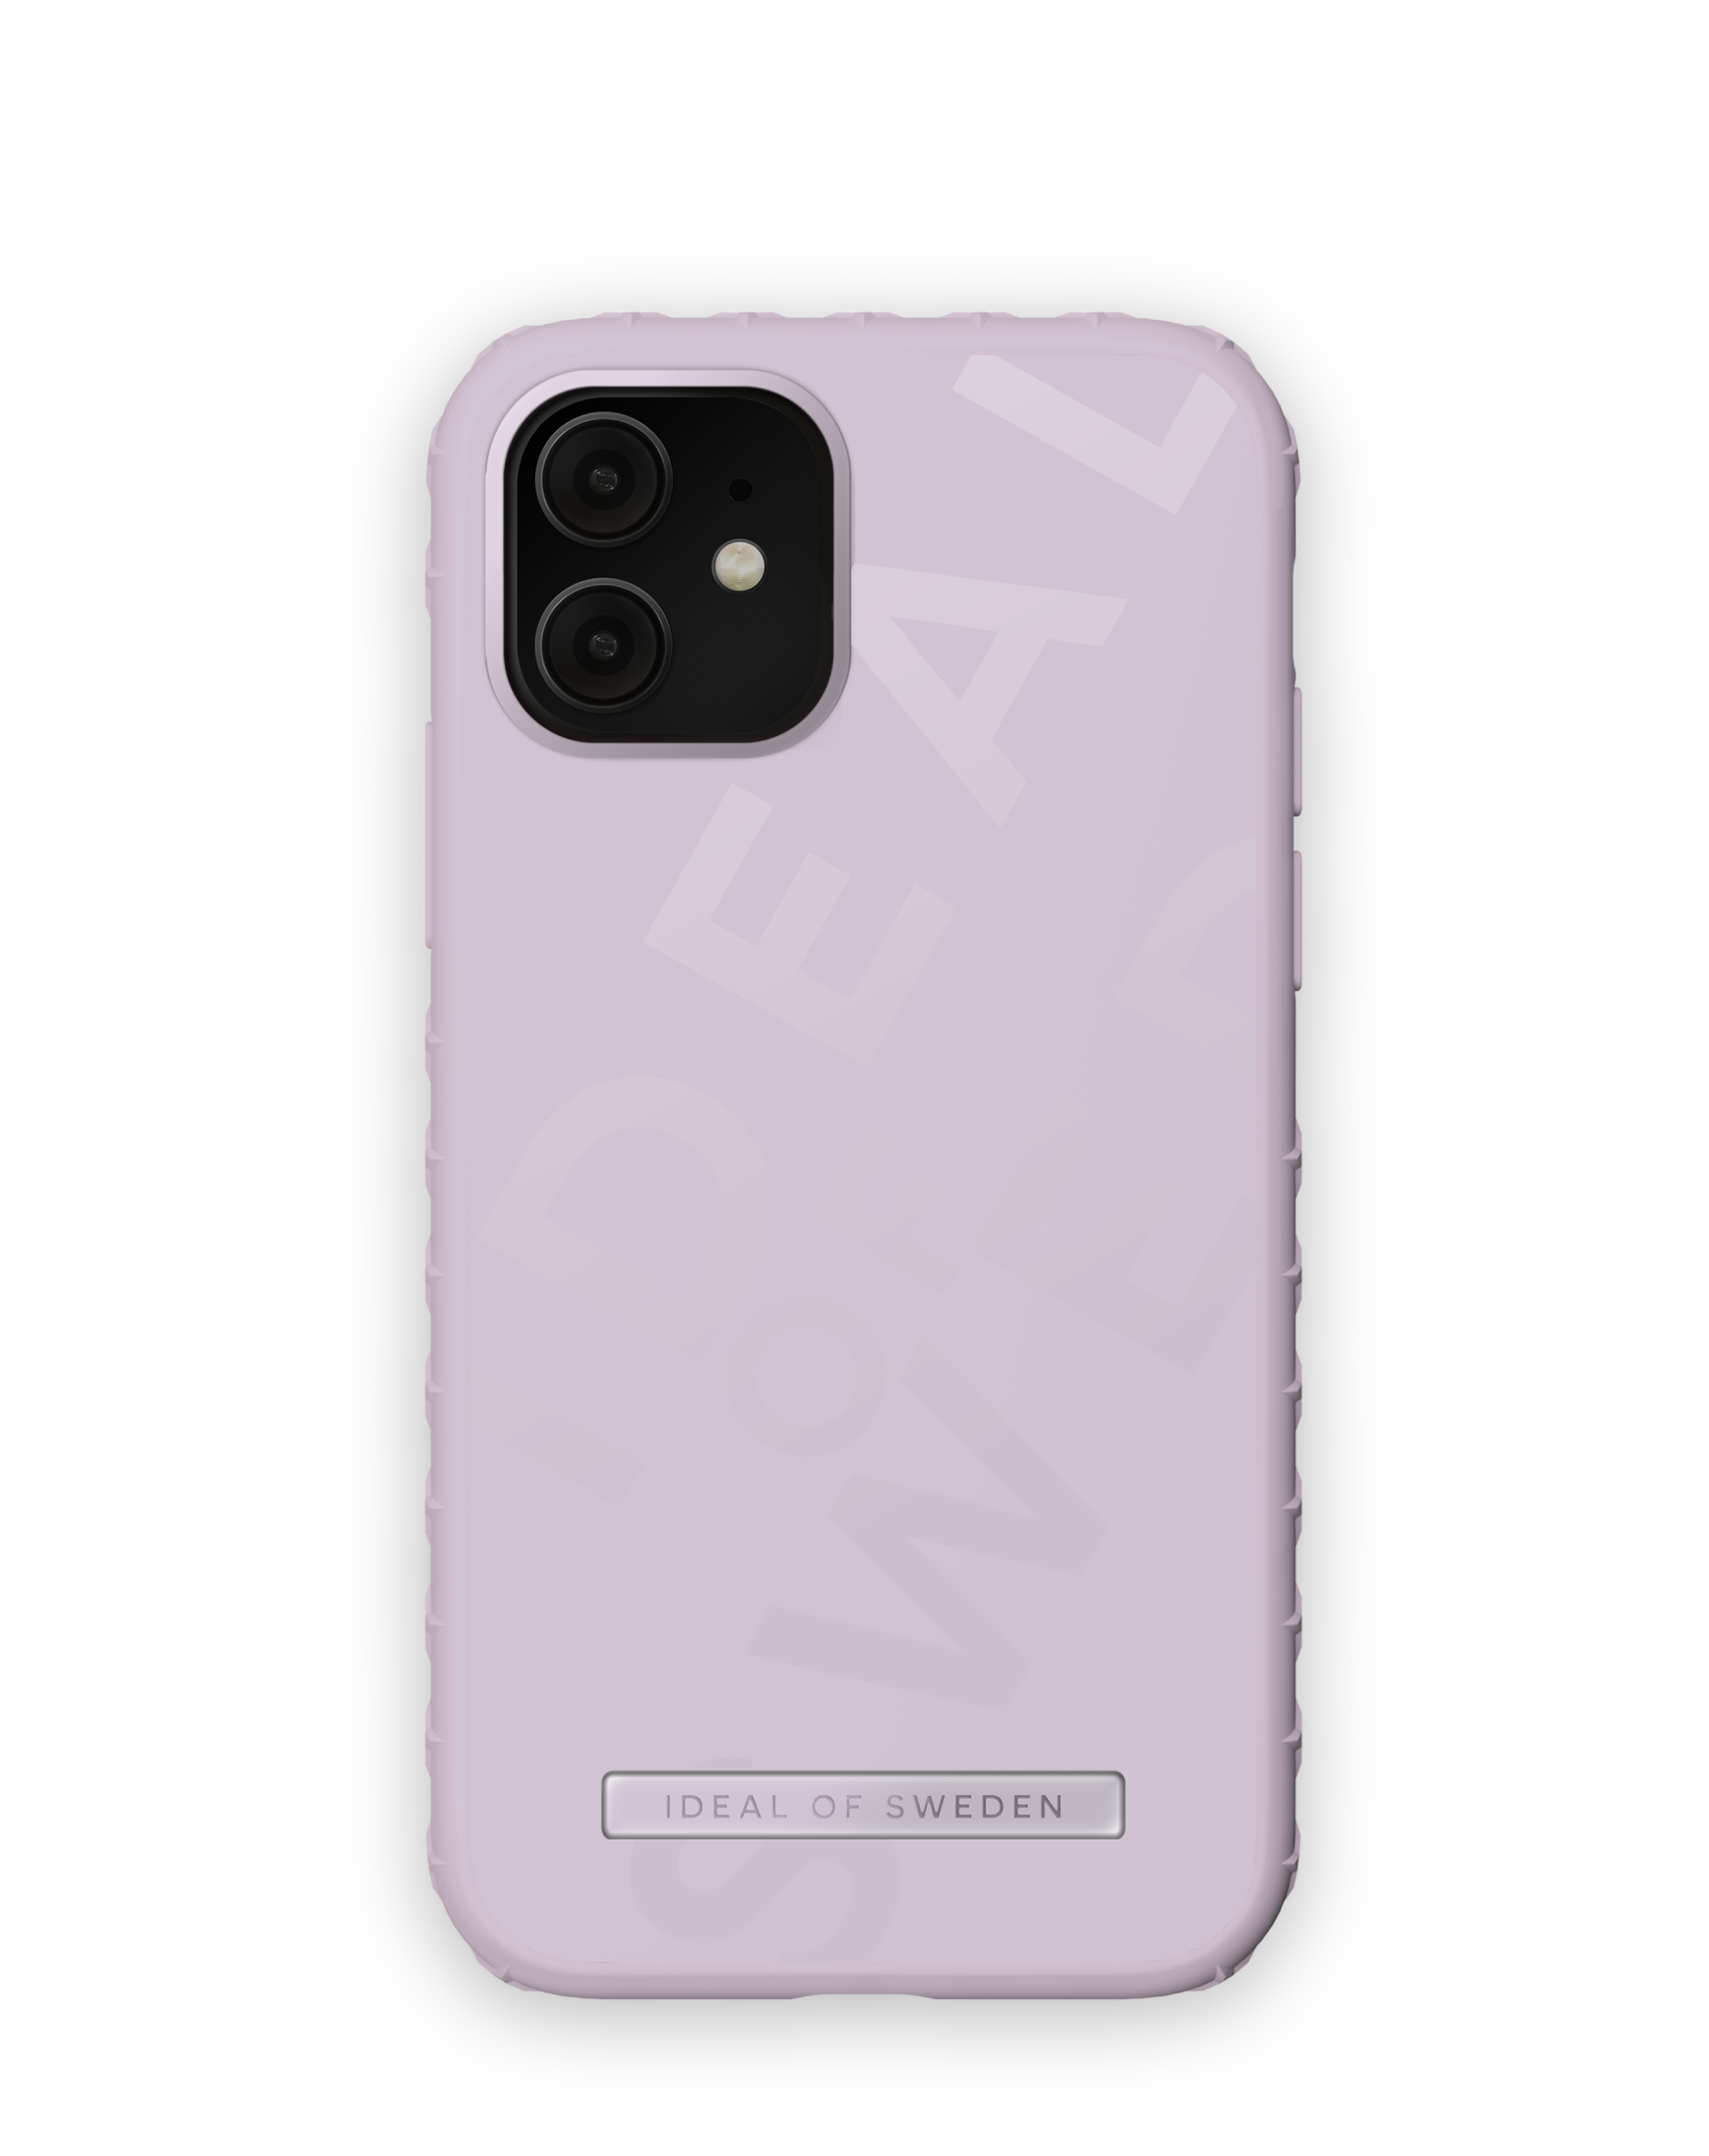 OF iPhone Backcover, / iPhone IDEAL Lavender Force IDACAS22-I1961-382, SWEDEN XR, Apple, 11